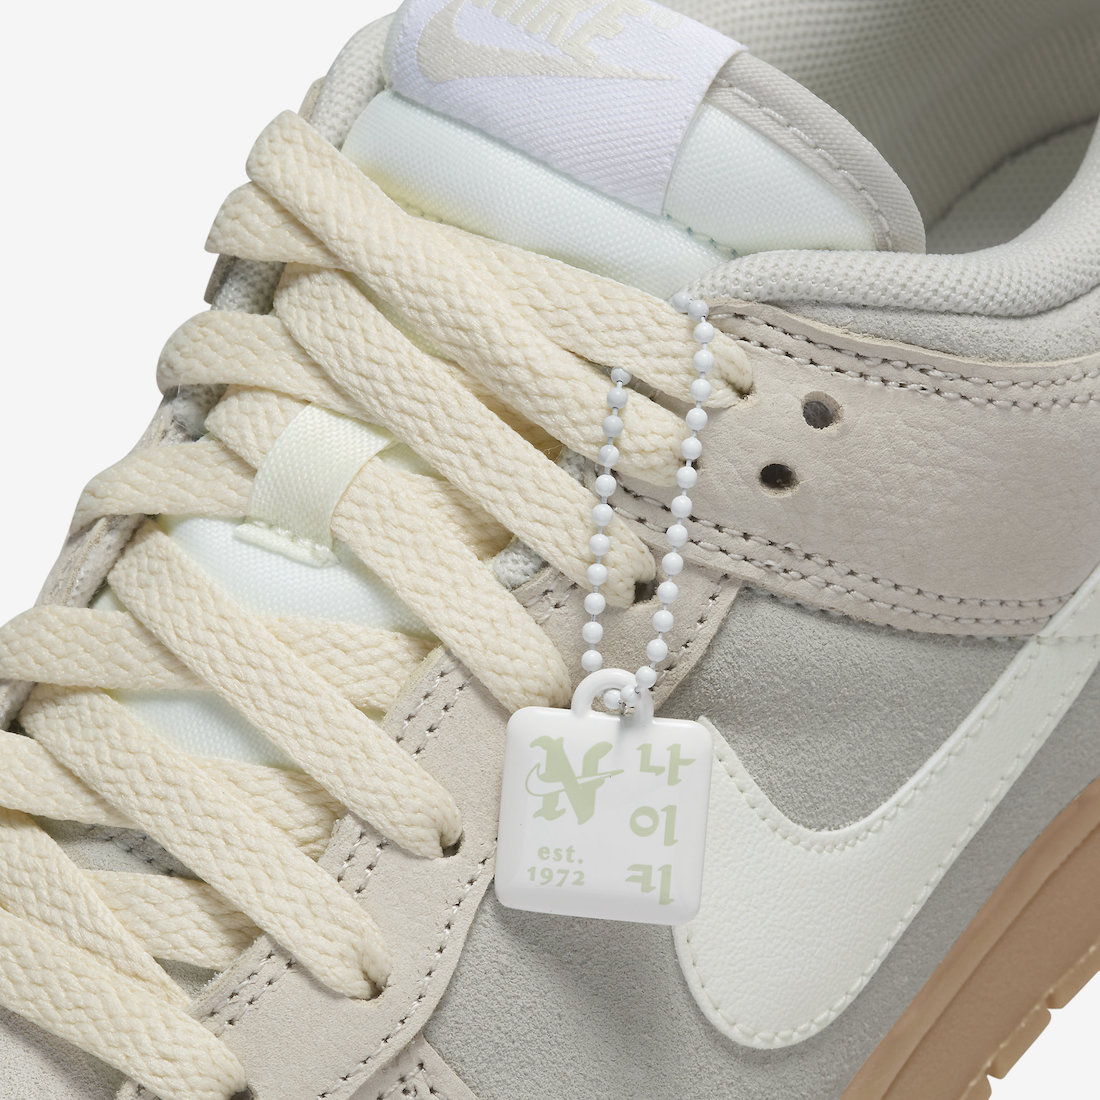 Nike Dunk Low Hangul Day FQ8147-104 special hangtag